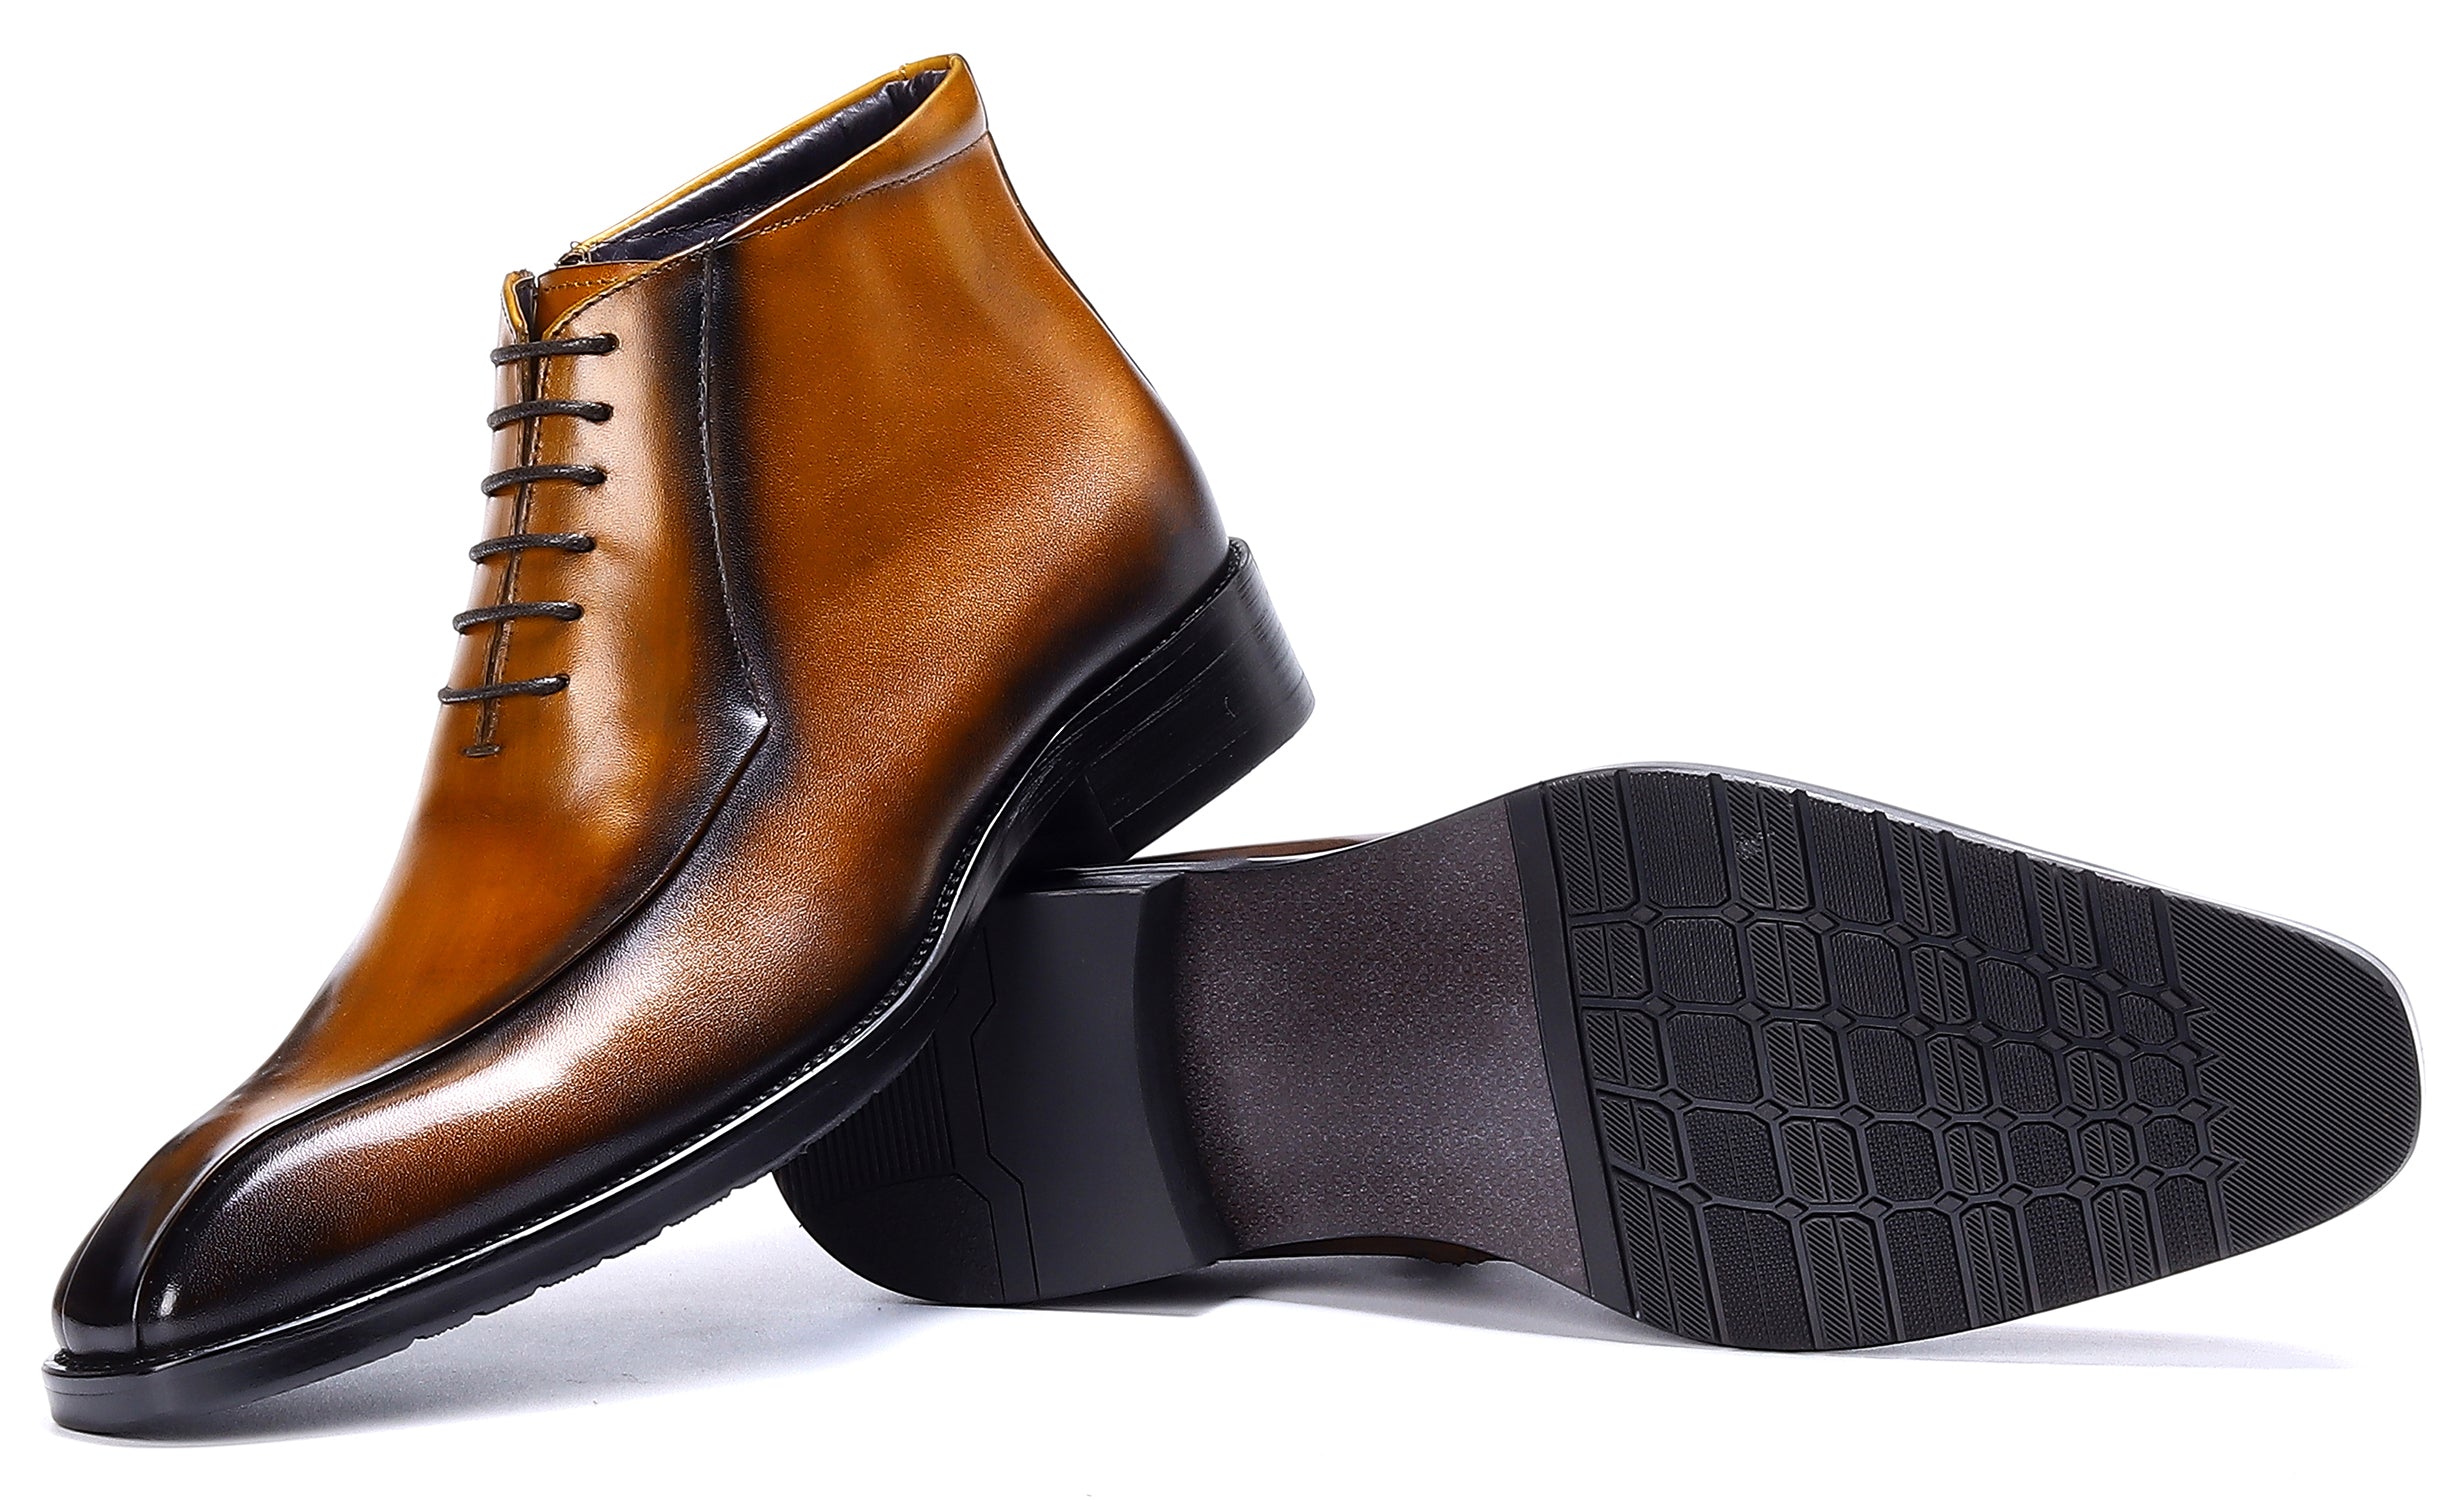 Men's Leather Fashion Formal Dress Boots